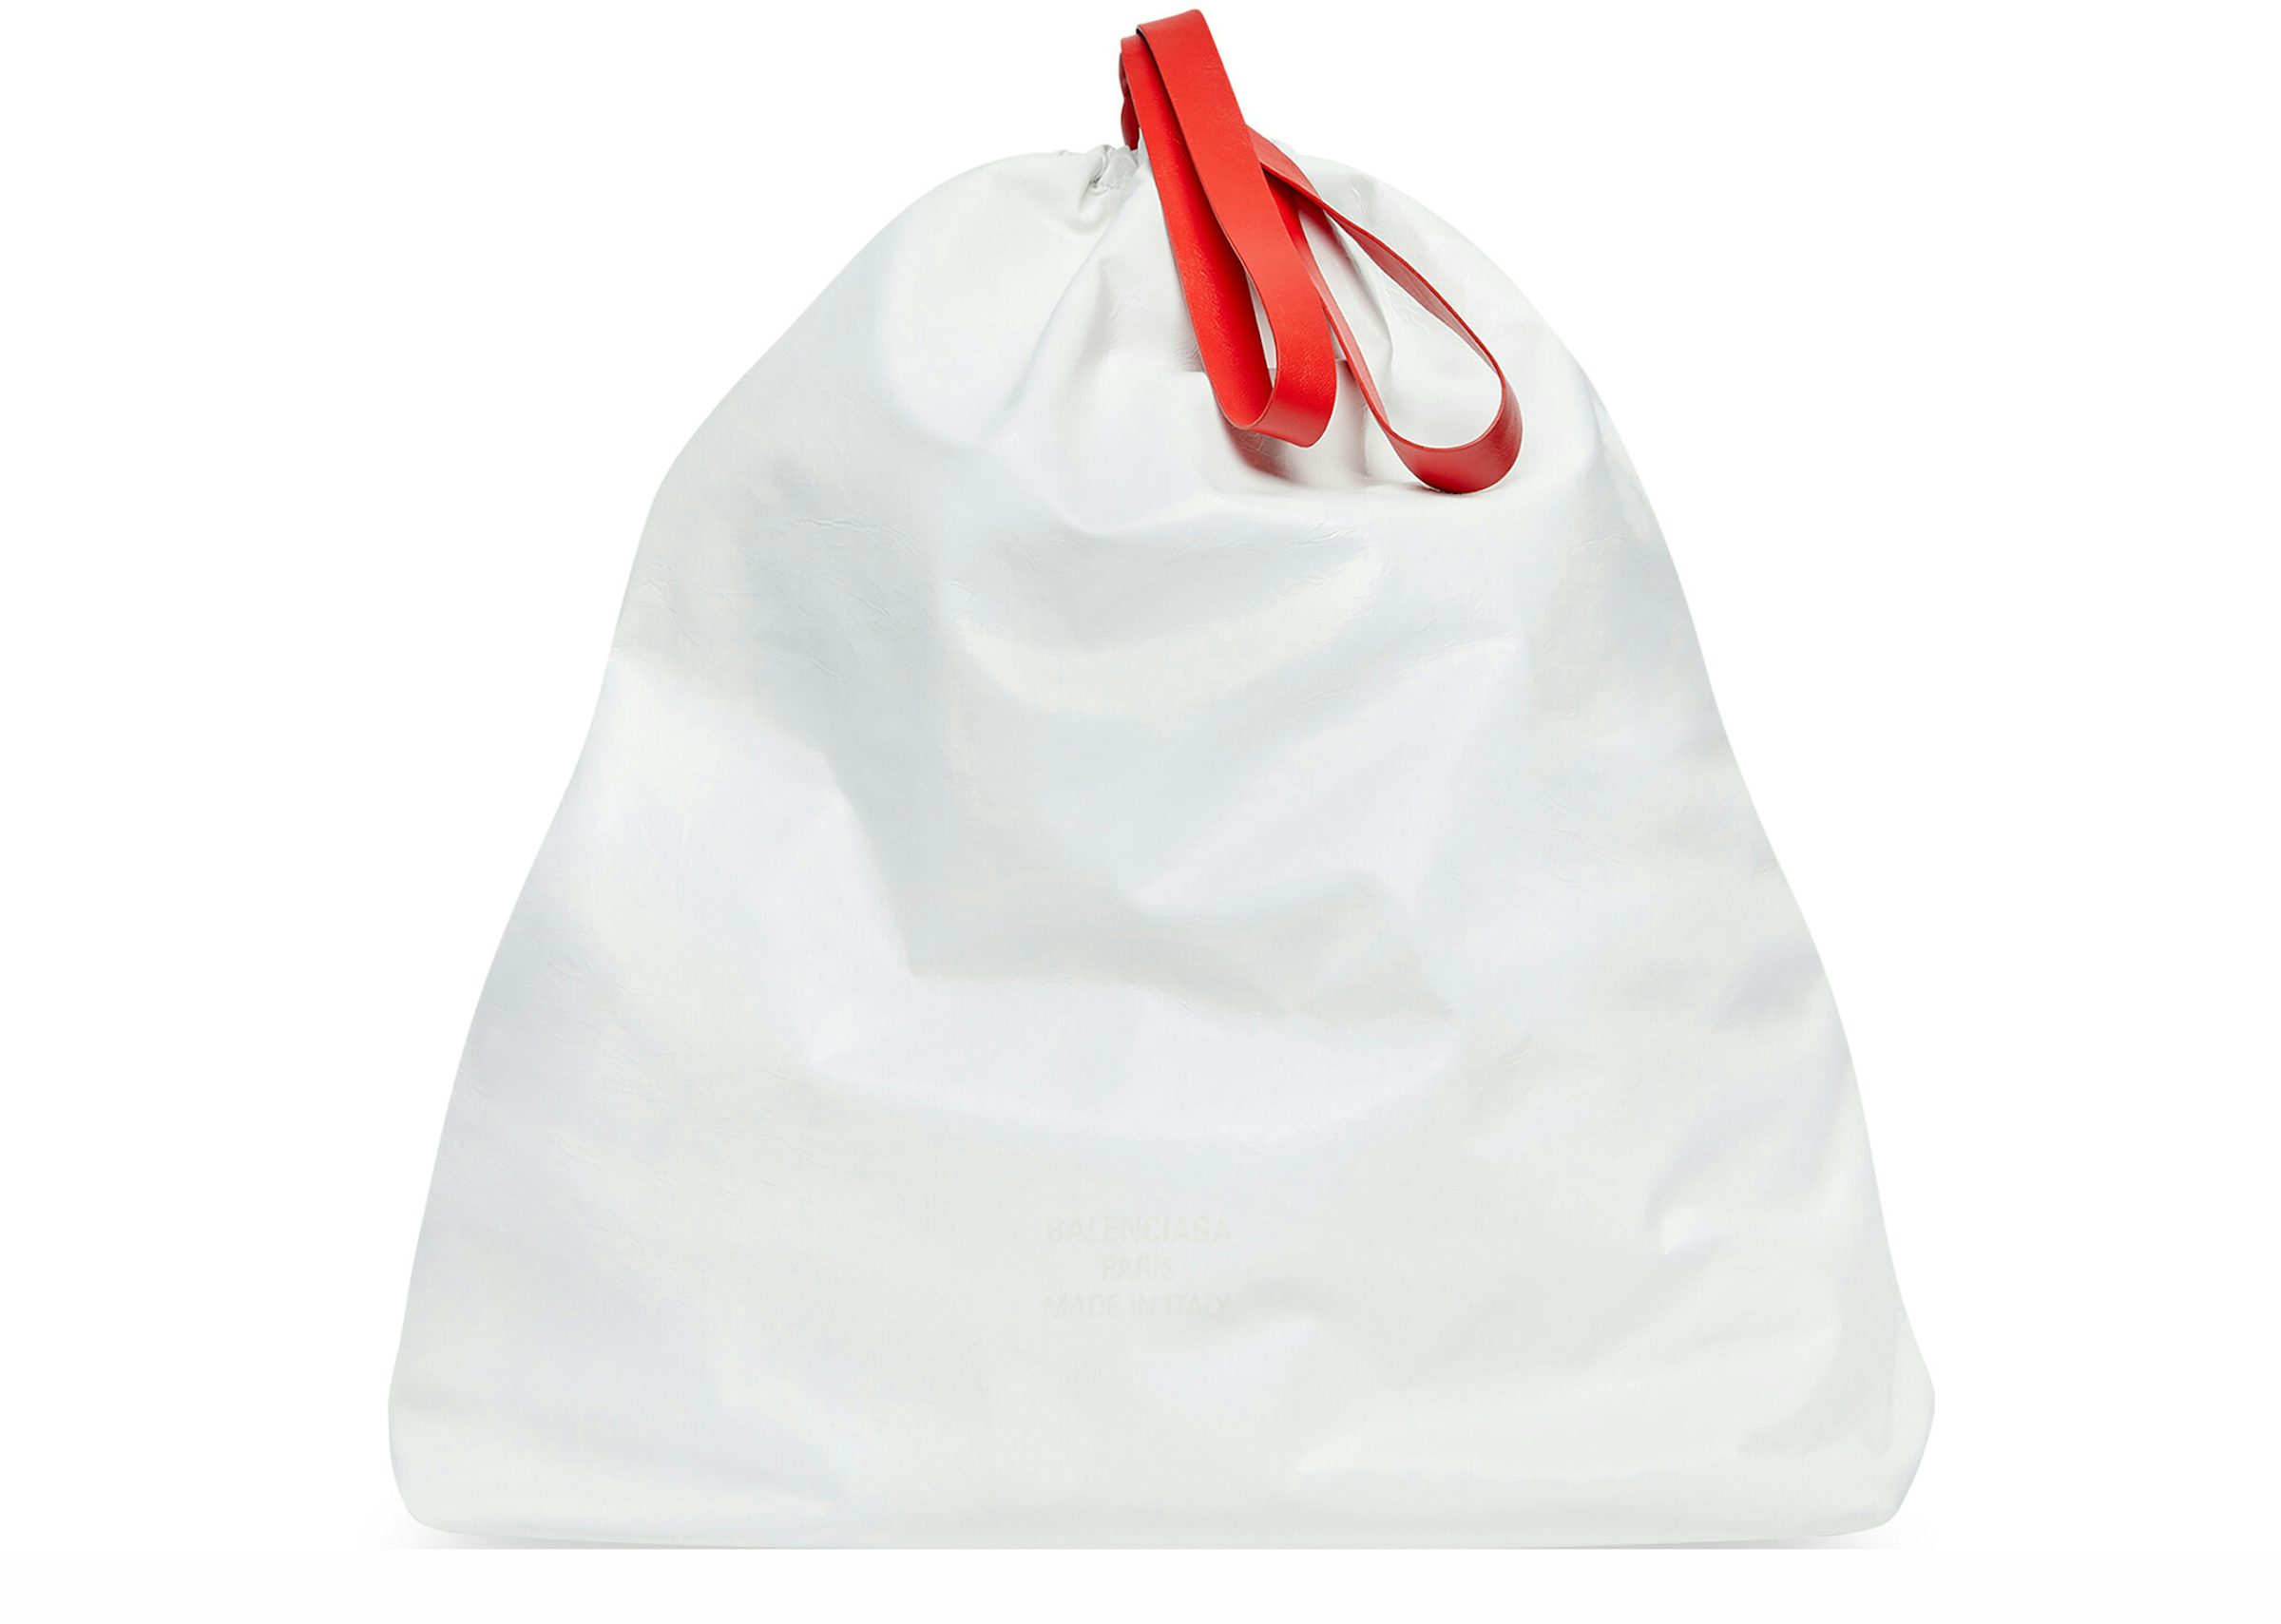 Balenciaga Trash Bag Large Pouch White/Red in Calfskin Leather